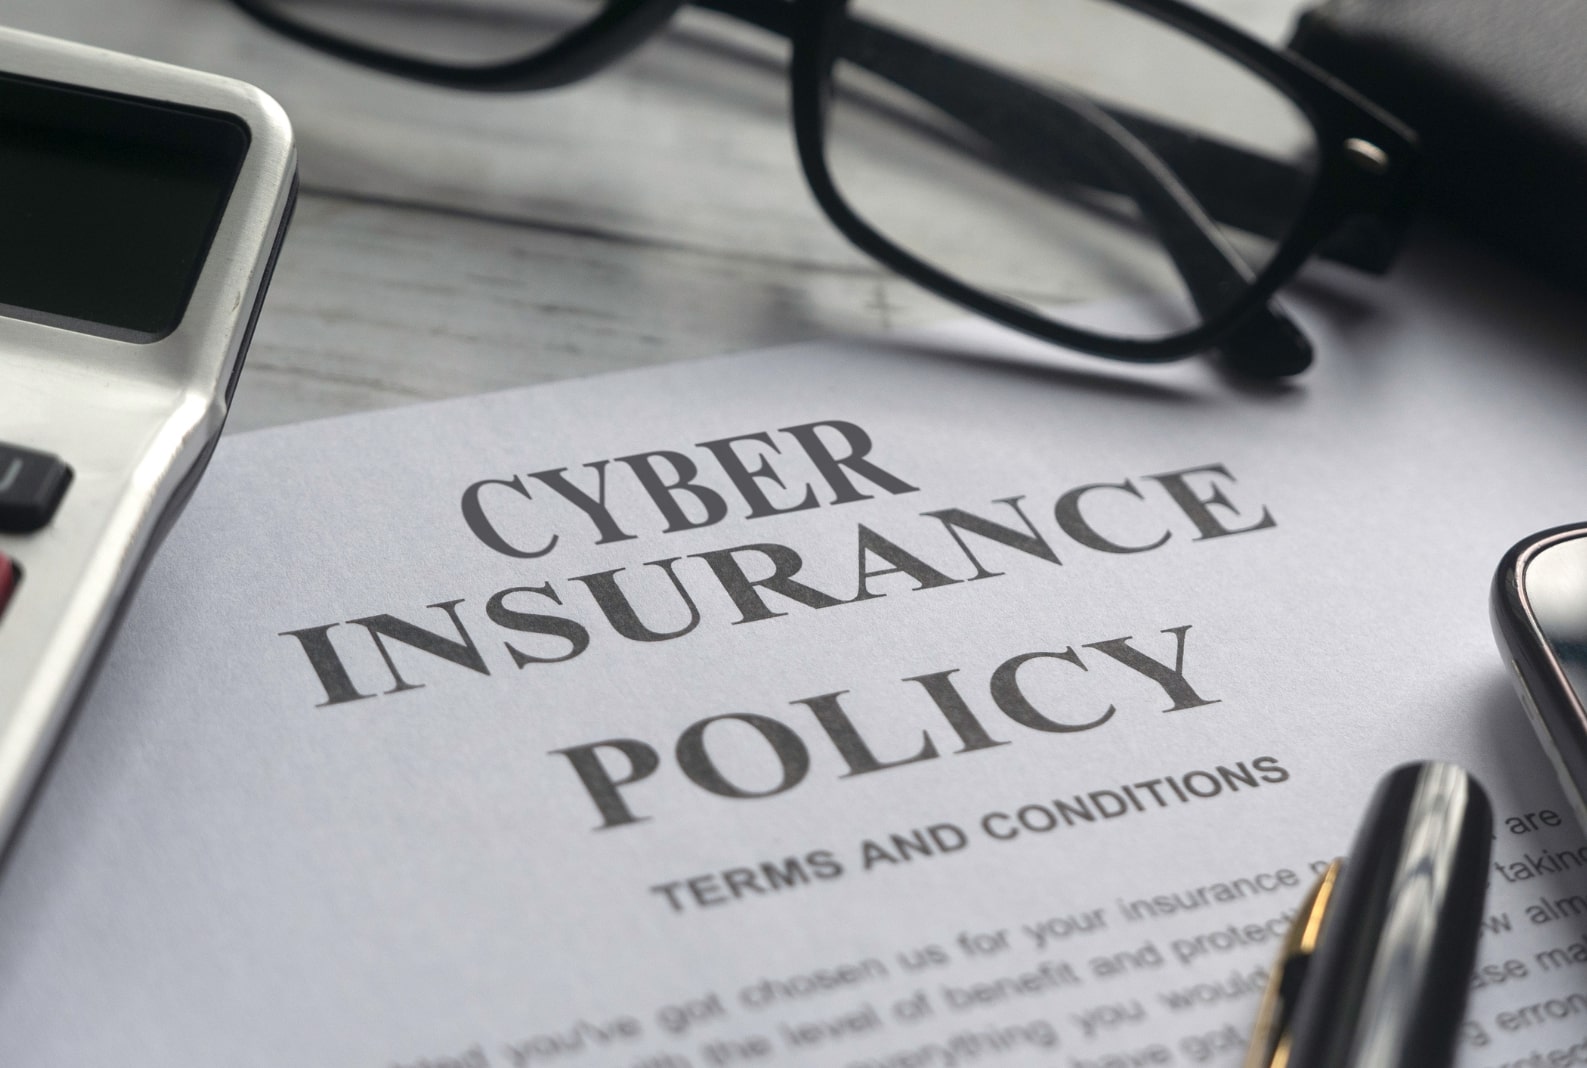 Why It’s Important to Have Cybersecurity Insurance